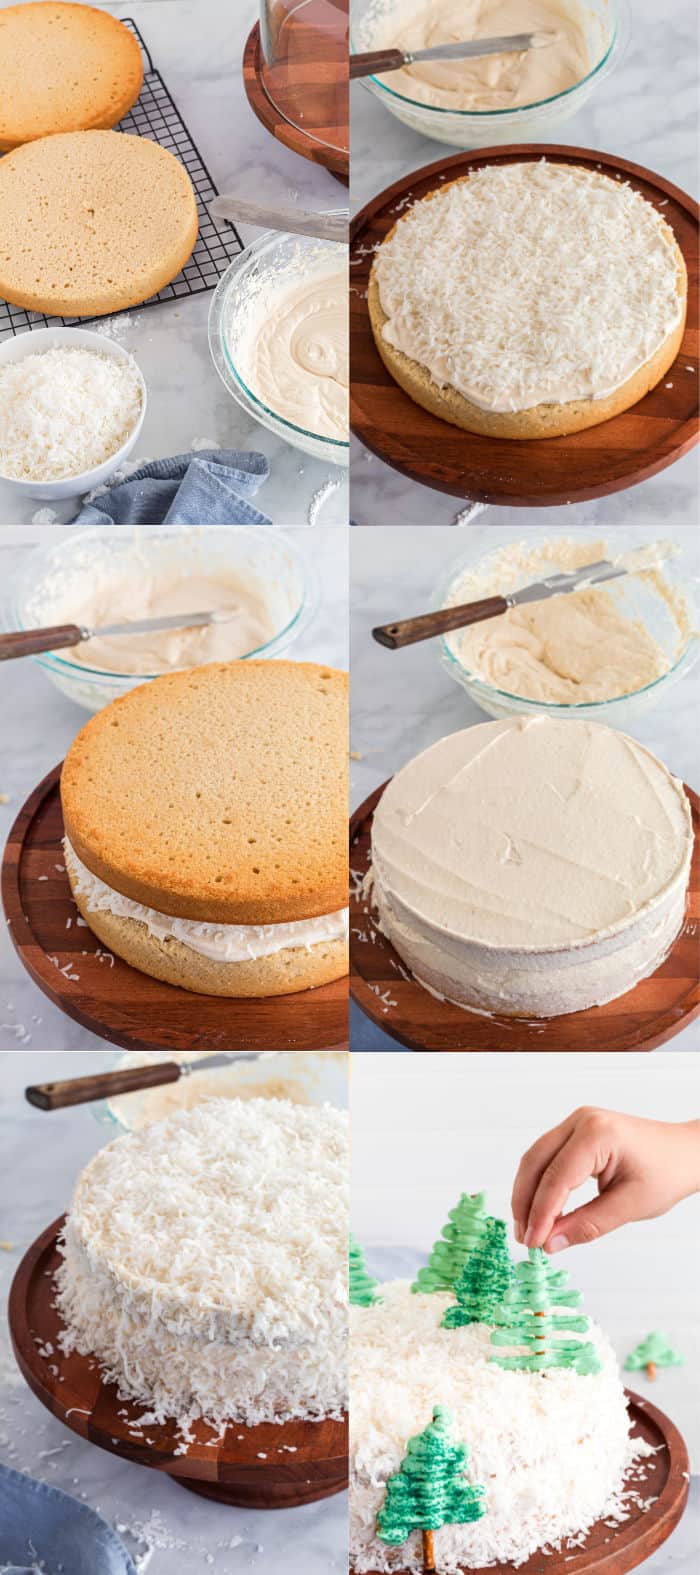 how to frost a cake